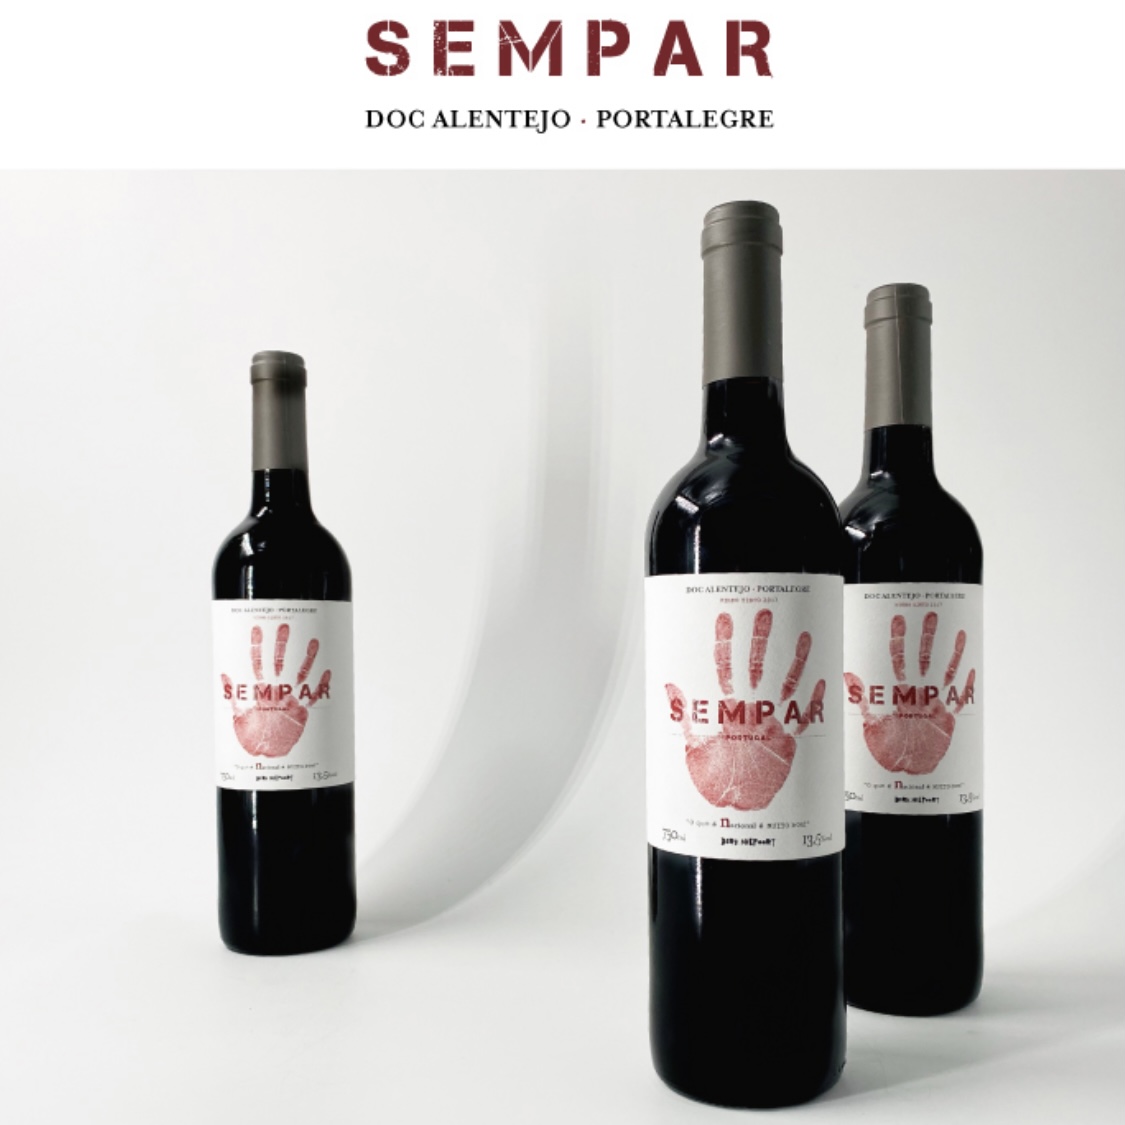 Dirk dreams of high Alentejo and SEMPAR is born! SEMPAR represents what Niepoort values the most…the true essence of its vineyards of origin. This is more than an Alentejo wine, it is the Portalegre expression. #Niepoort # Alentejo #Portalegre